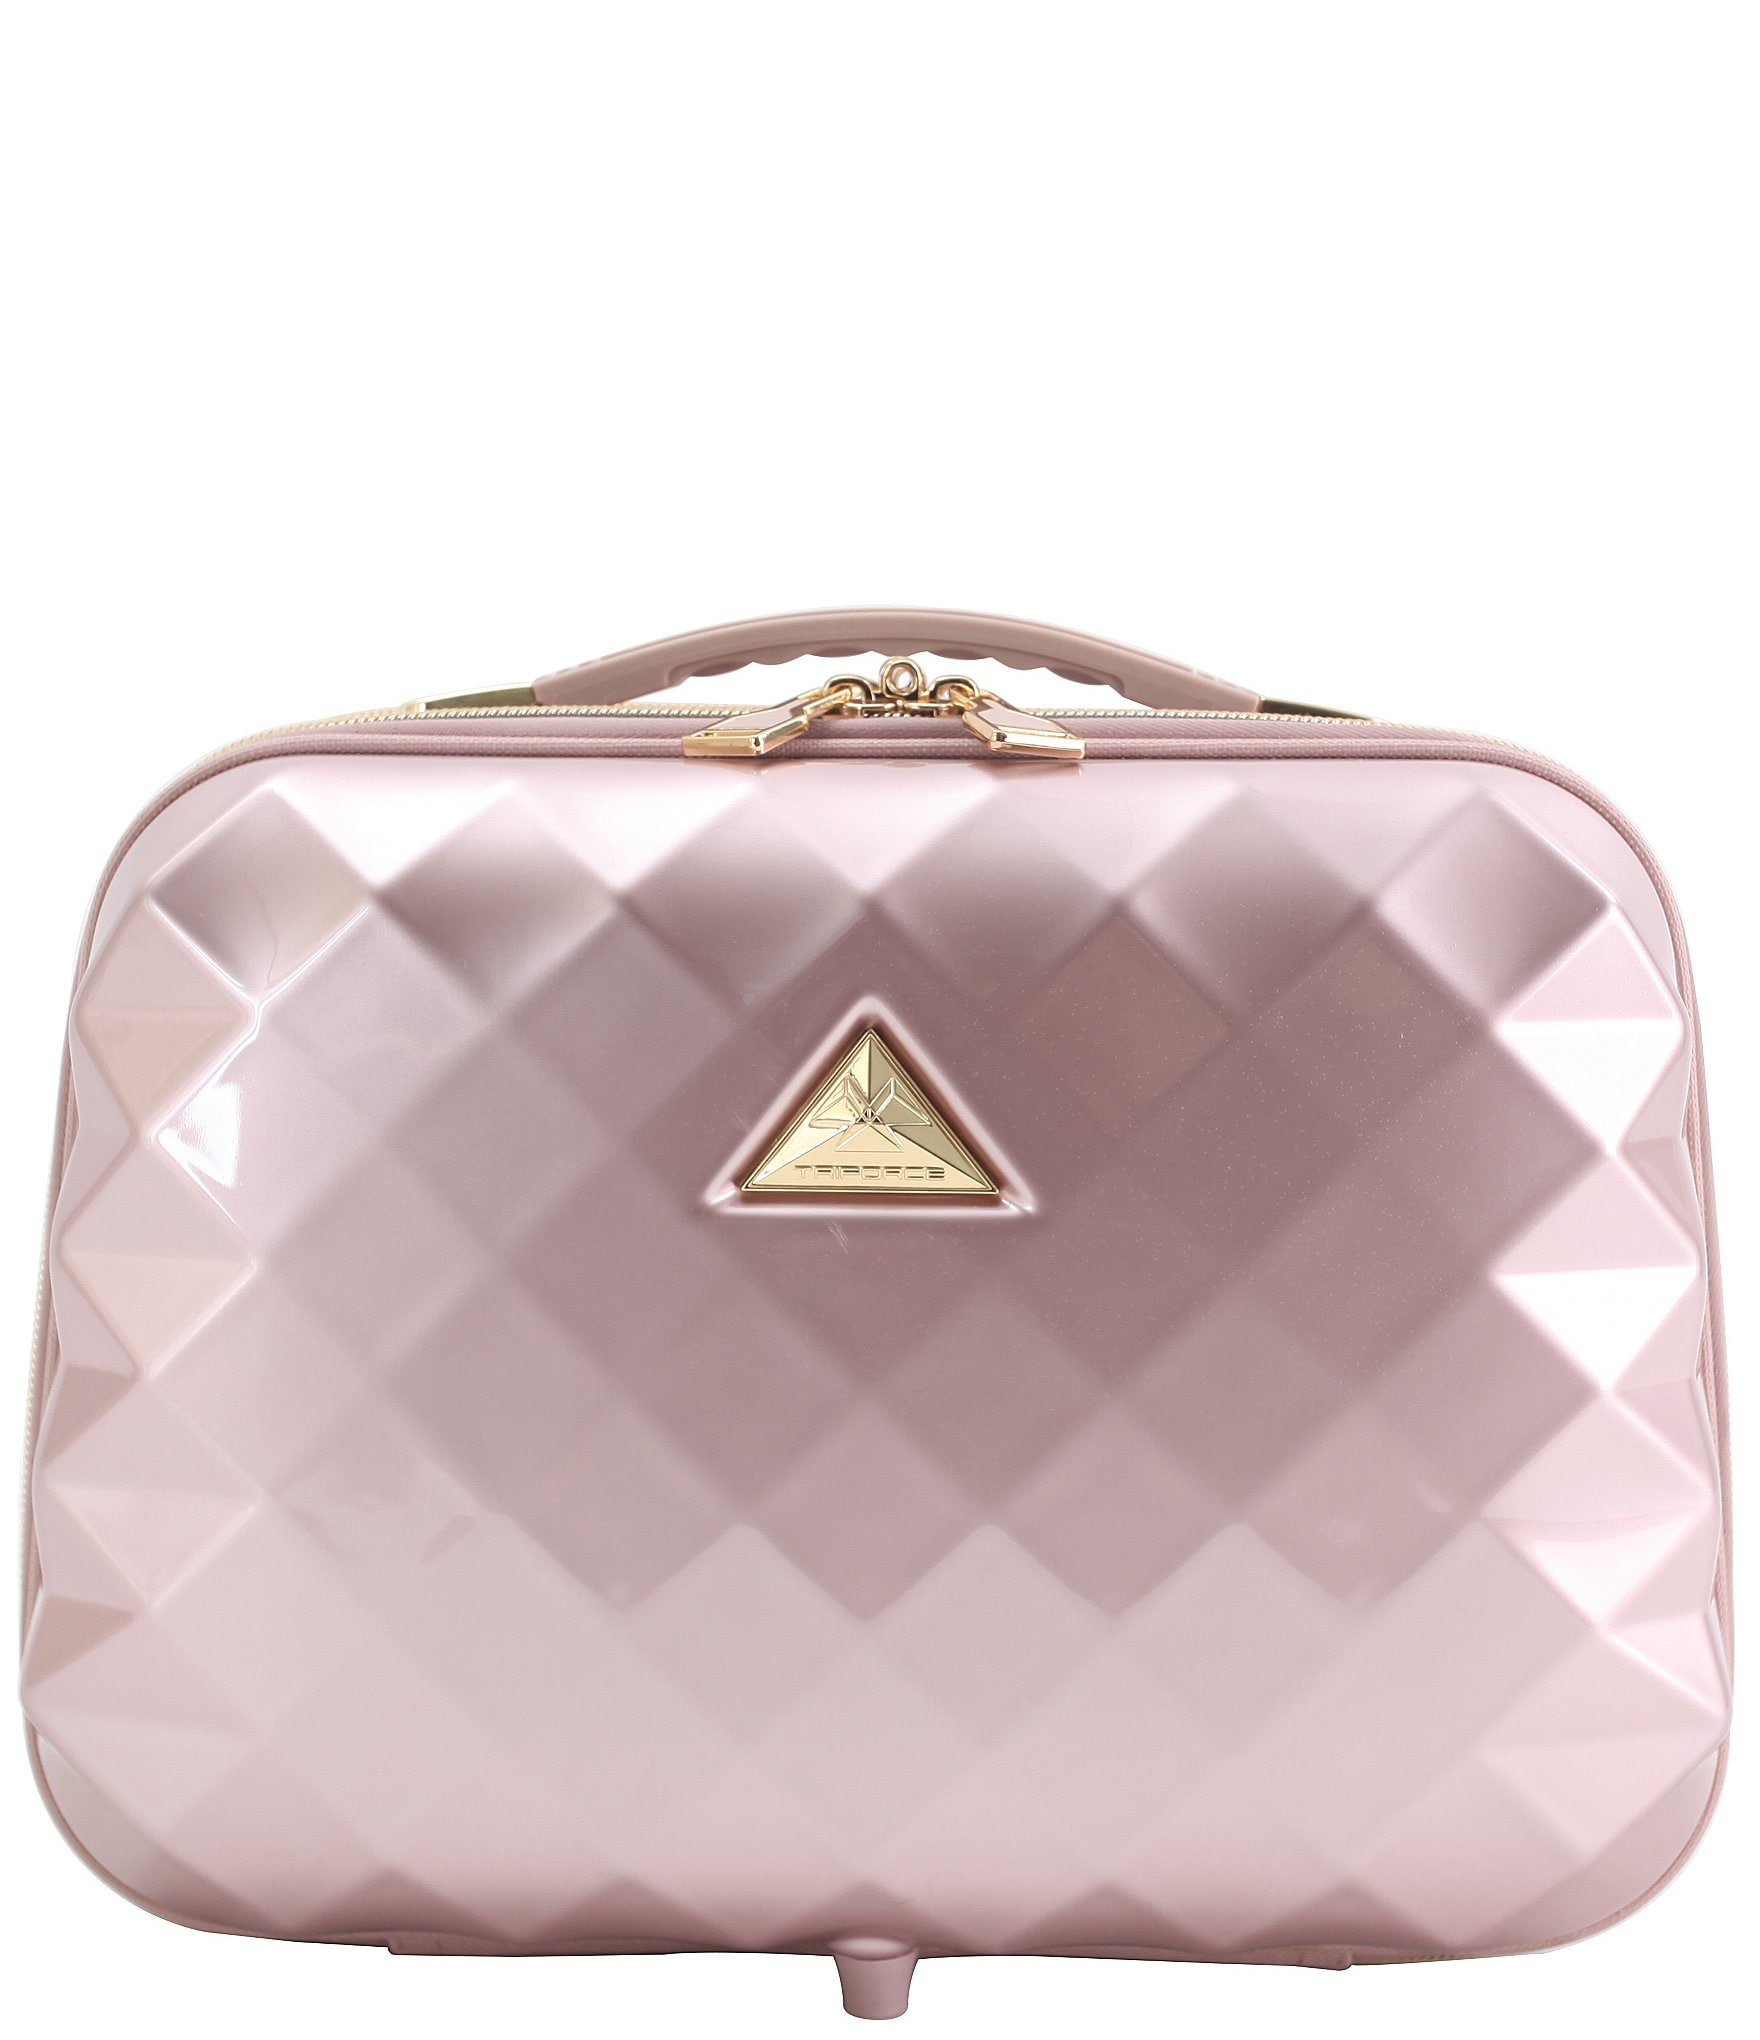 Triforce Savoir Collection Quilted with Floral Strap Travel Beauty